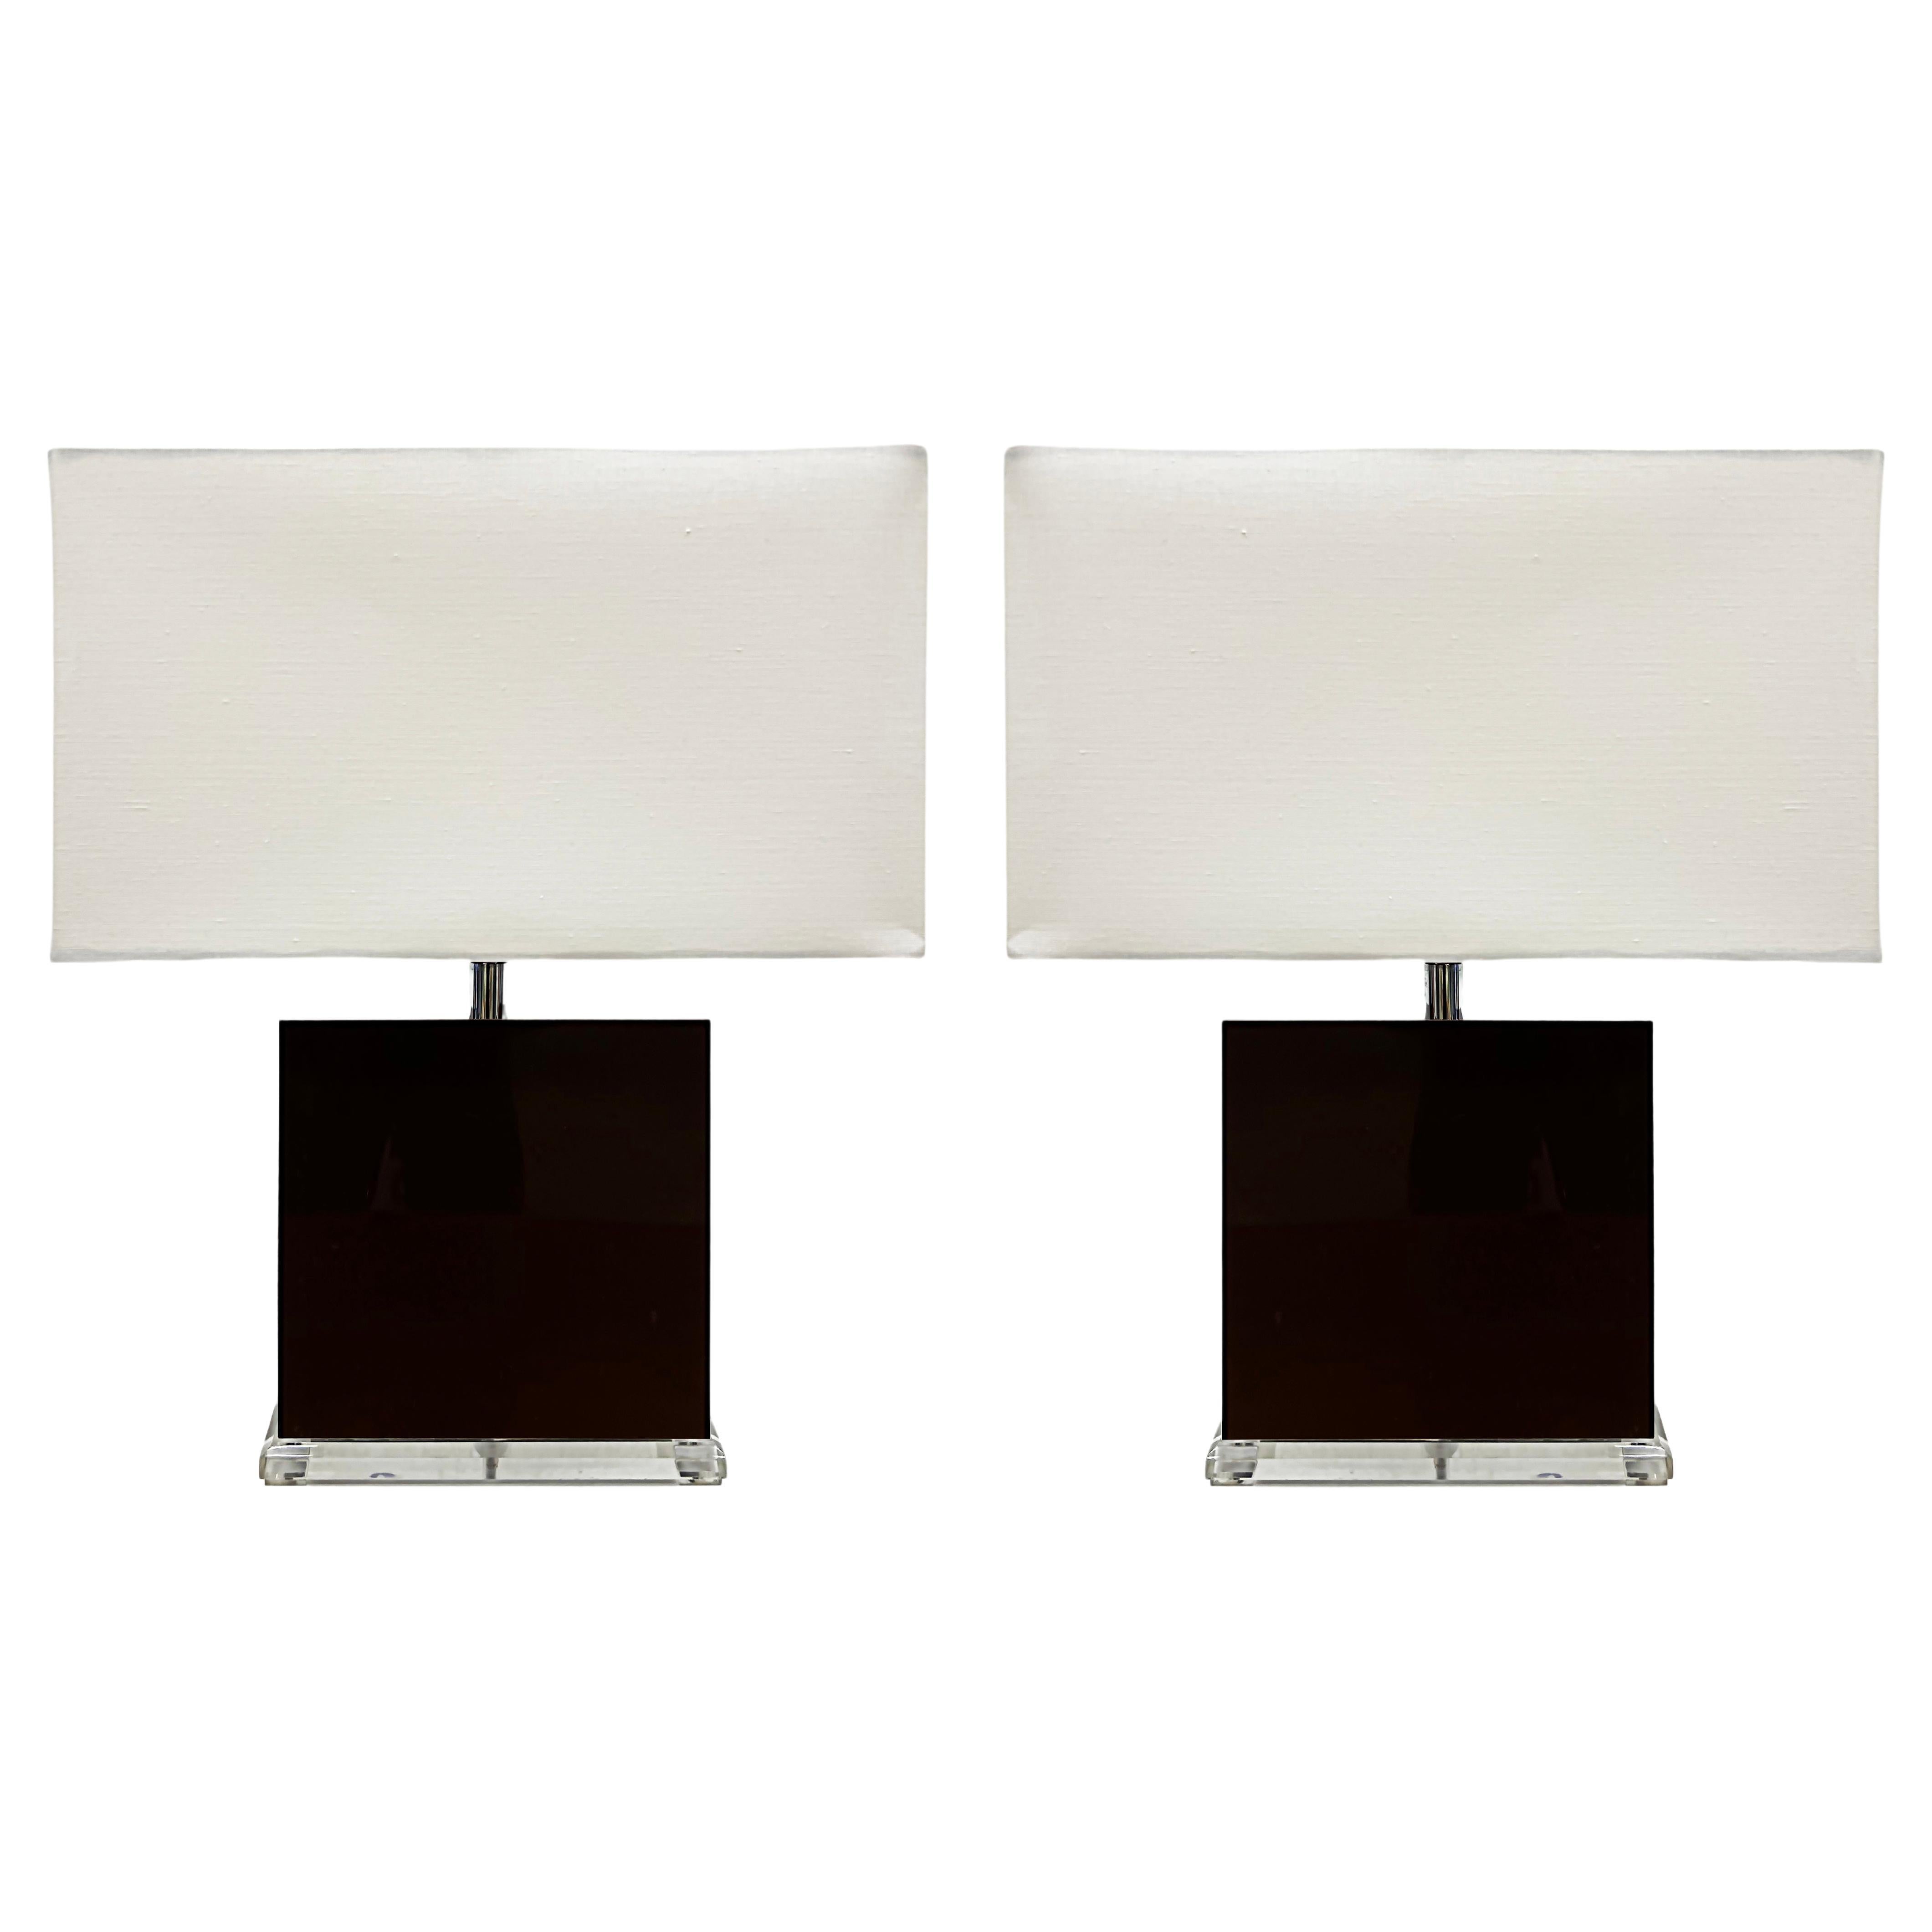 1970s Lucite and Chocolate Brown Acrylic Table Lamps, Pair